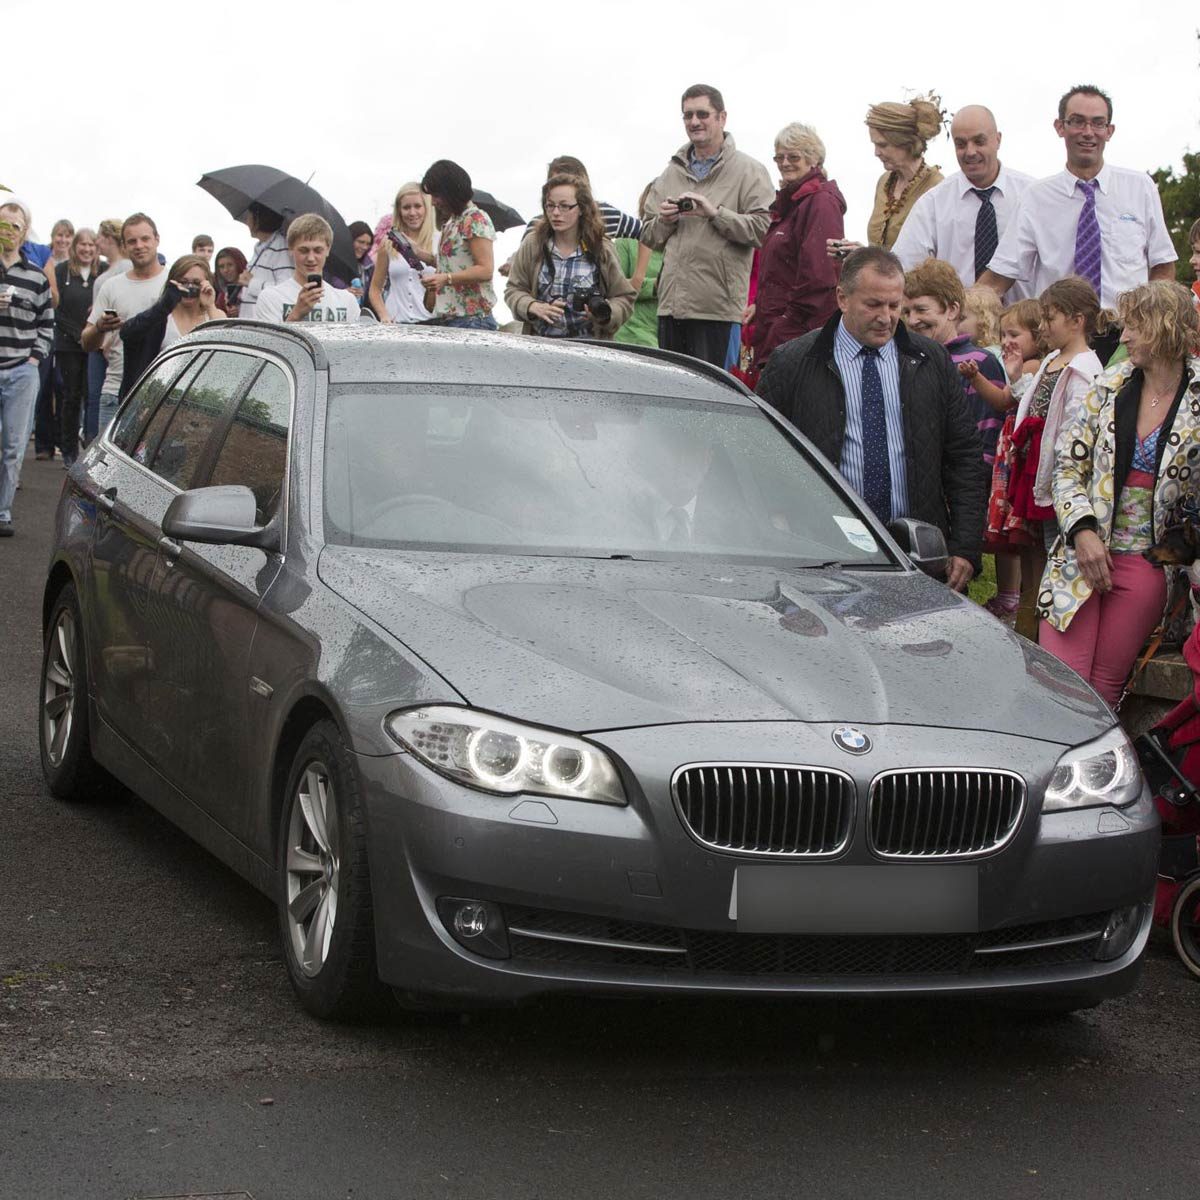 Prince William and Catherine Duchess of Cambridge drive in a gray BMW wagon